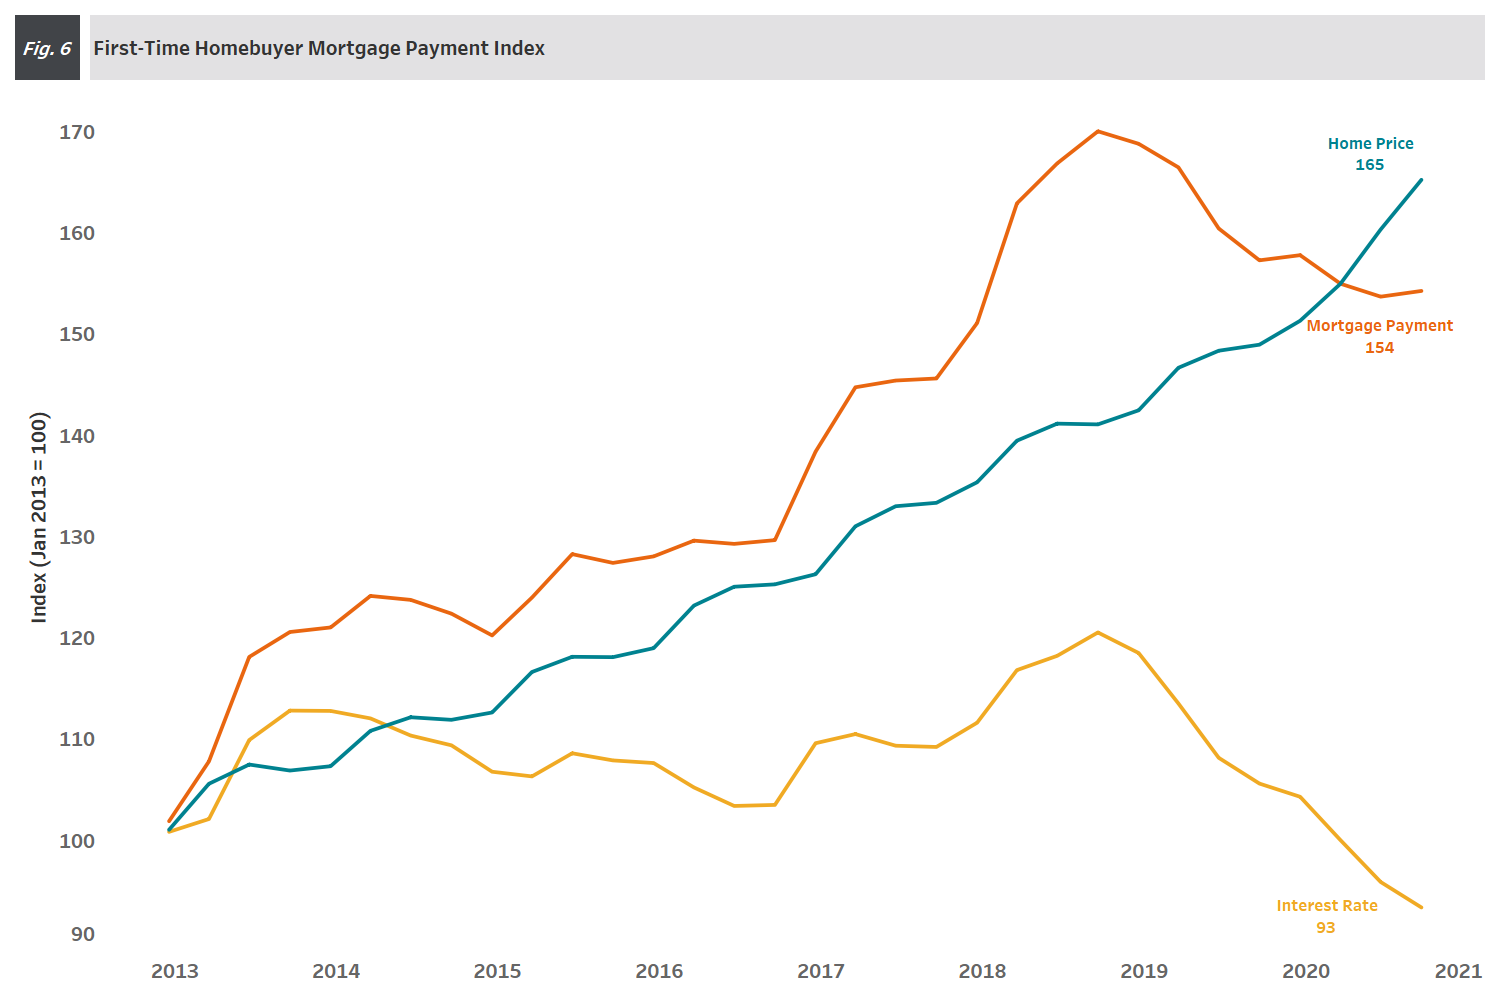 Chart: 4Q 2020 Figure 6 - First-Time Homebuyer Mortgage Payment Index